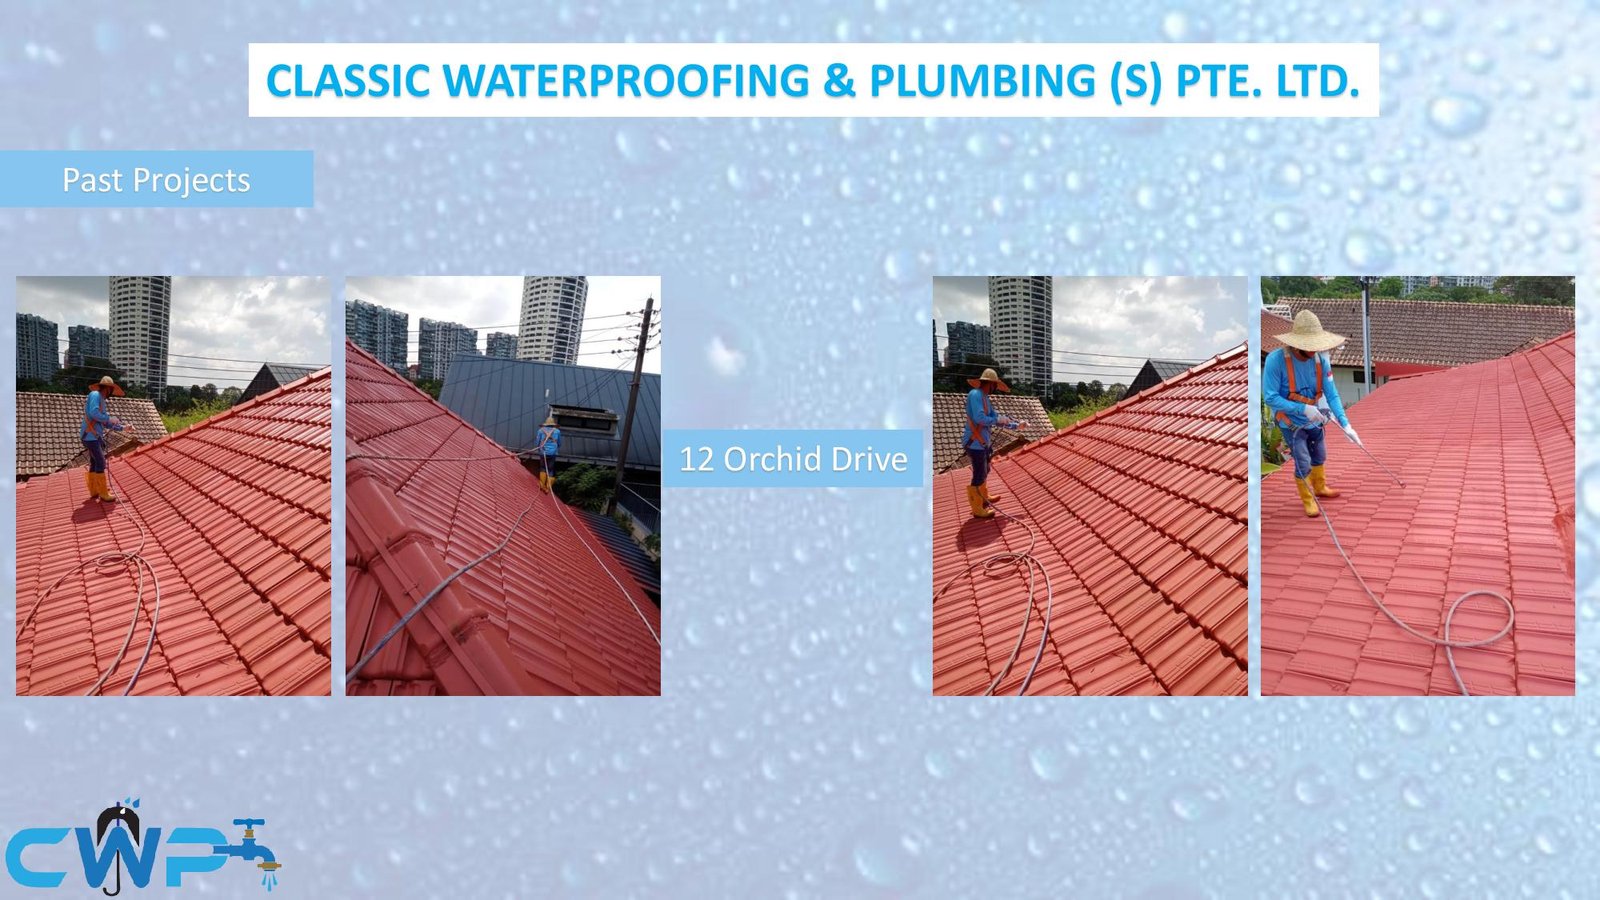 Classic waterproofing and plumbing roofing passed projects